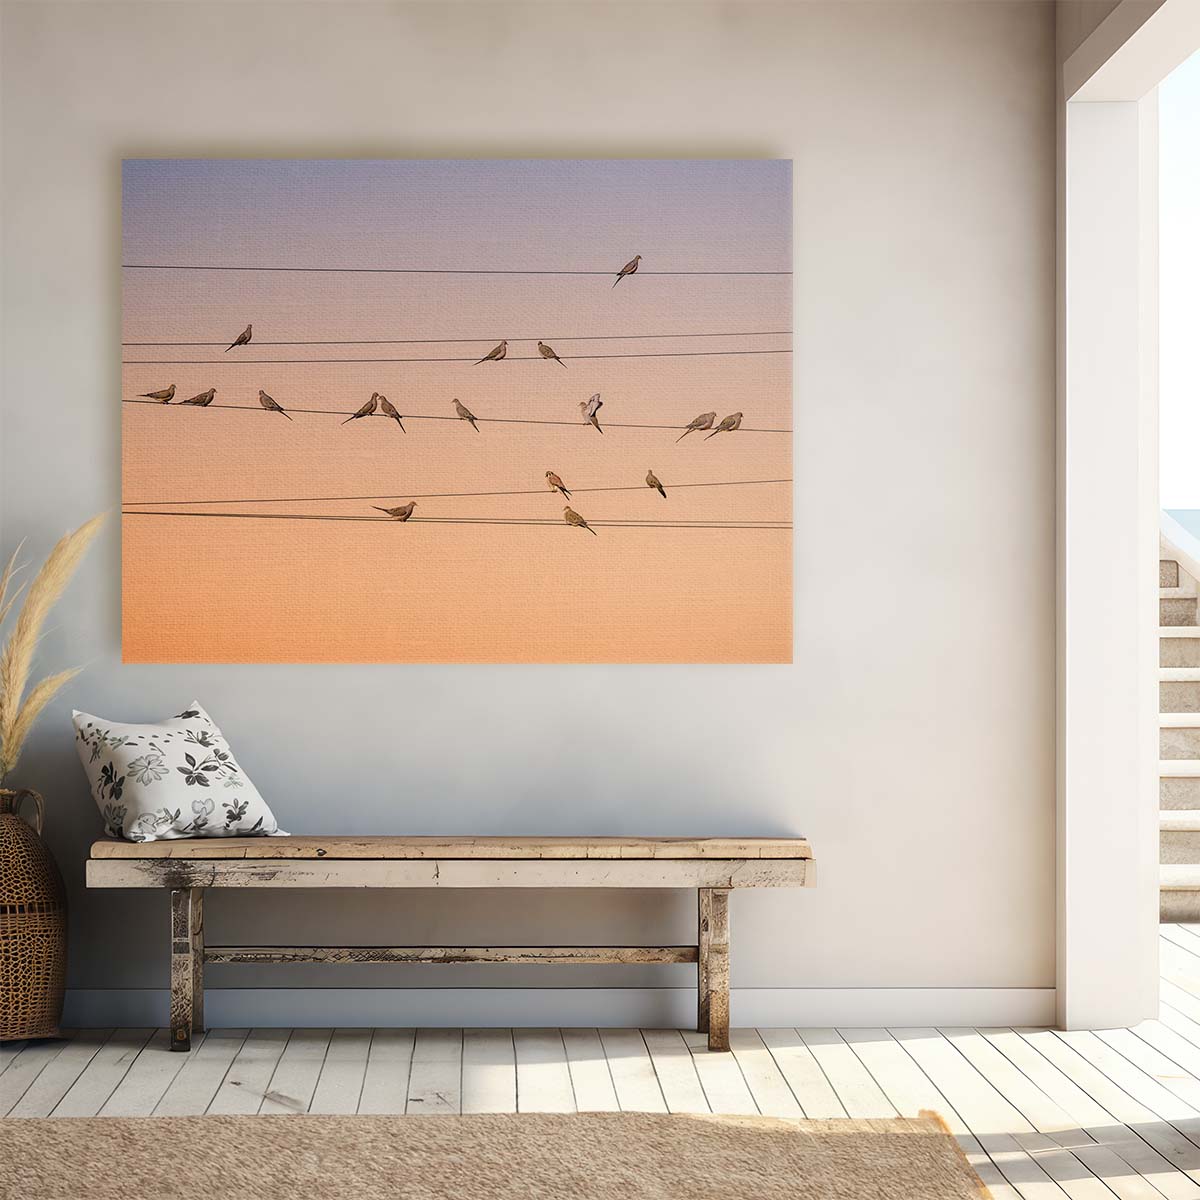 Sunrise Birds on Wire New Mexico Dawn Wall Art by Luxuriance Designs. Made in USA.